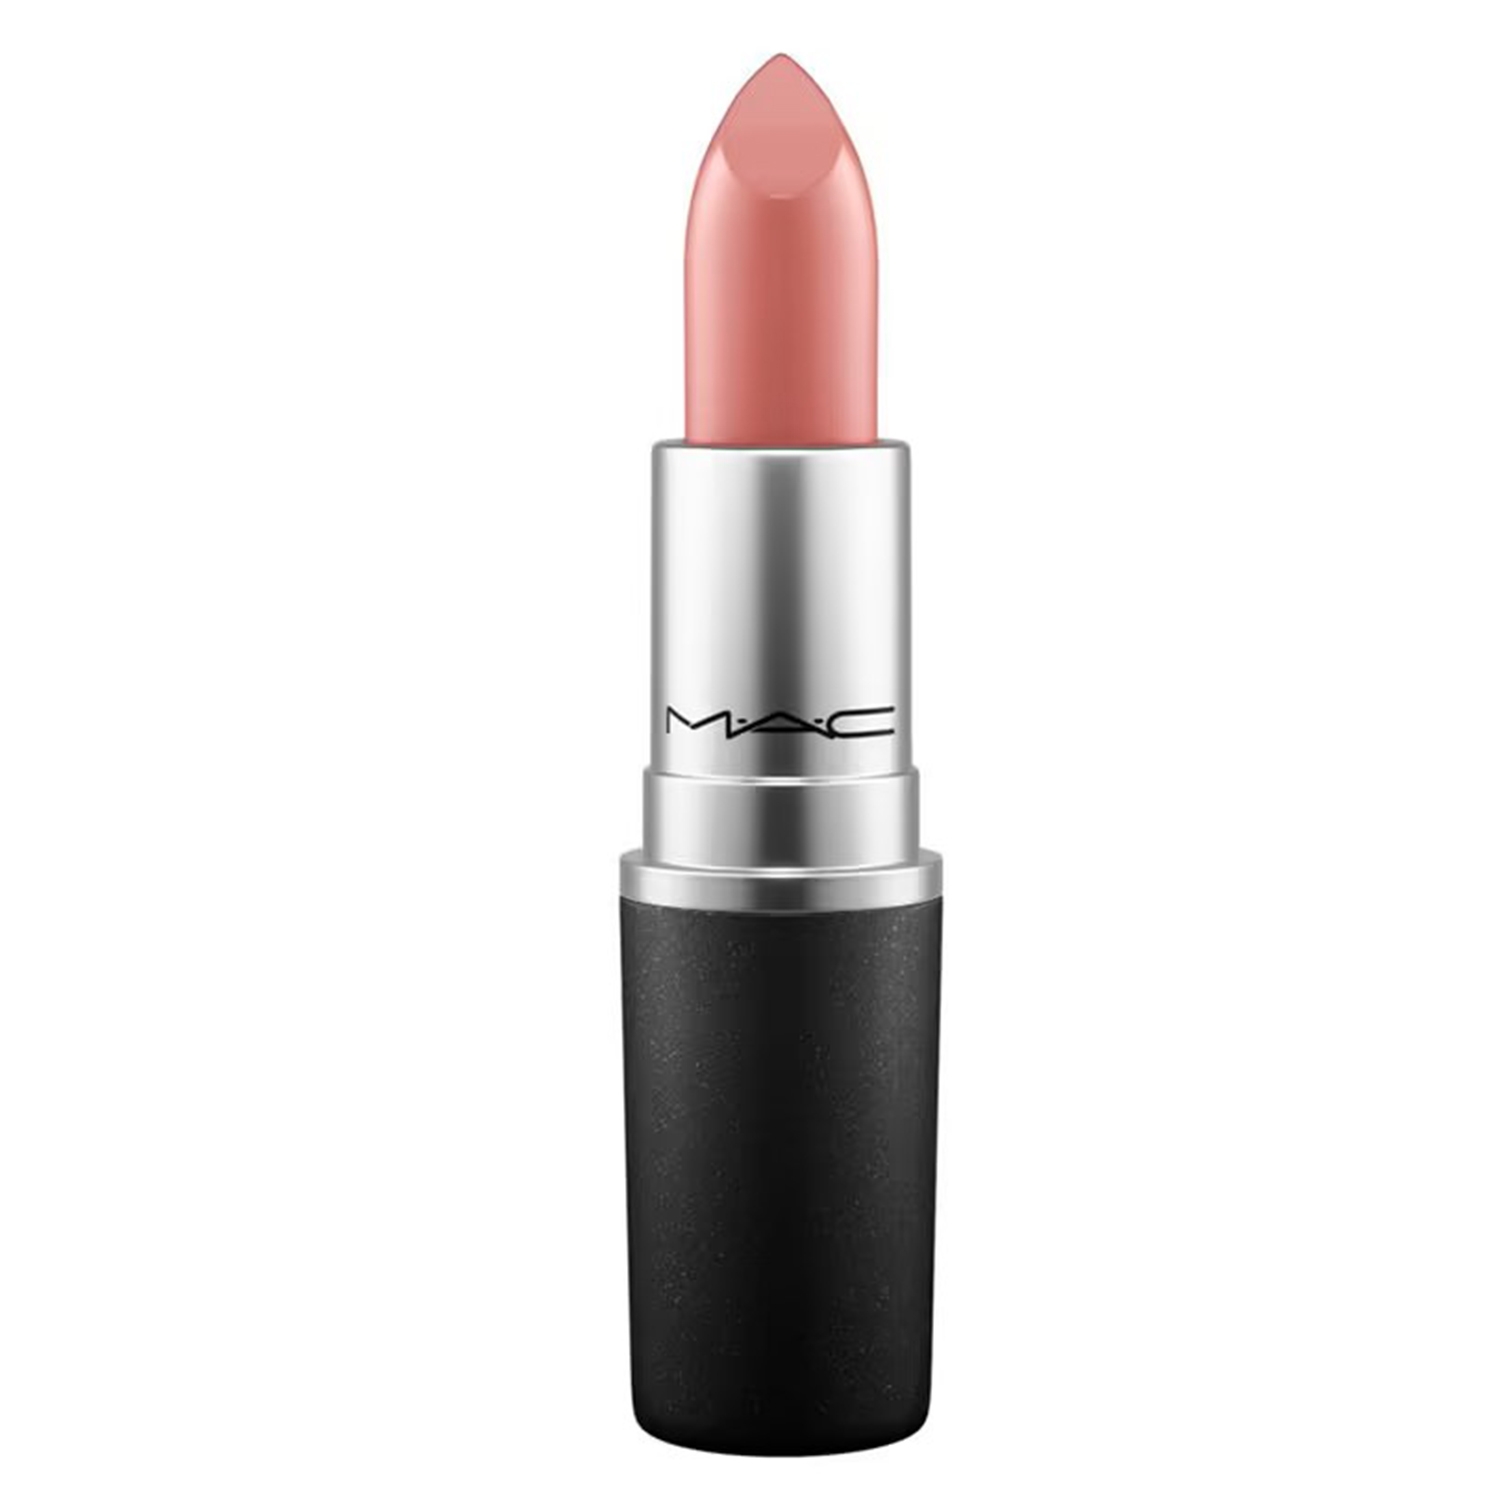 M.A.C | M.A.C Amplified Lipstick - Cosmo (3g)